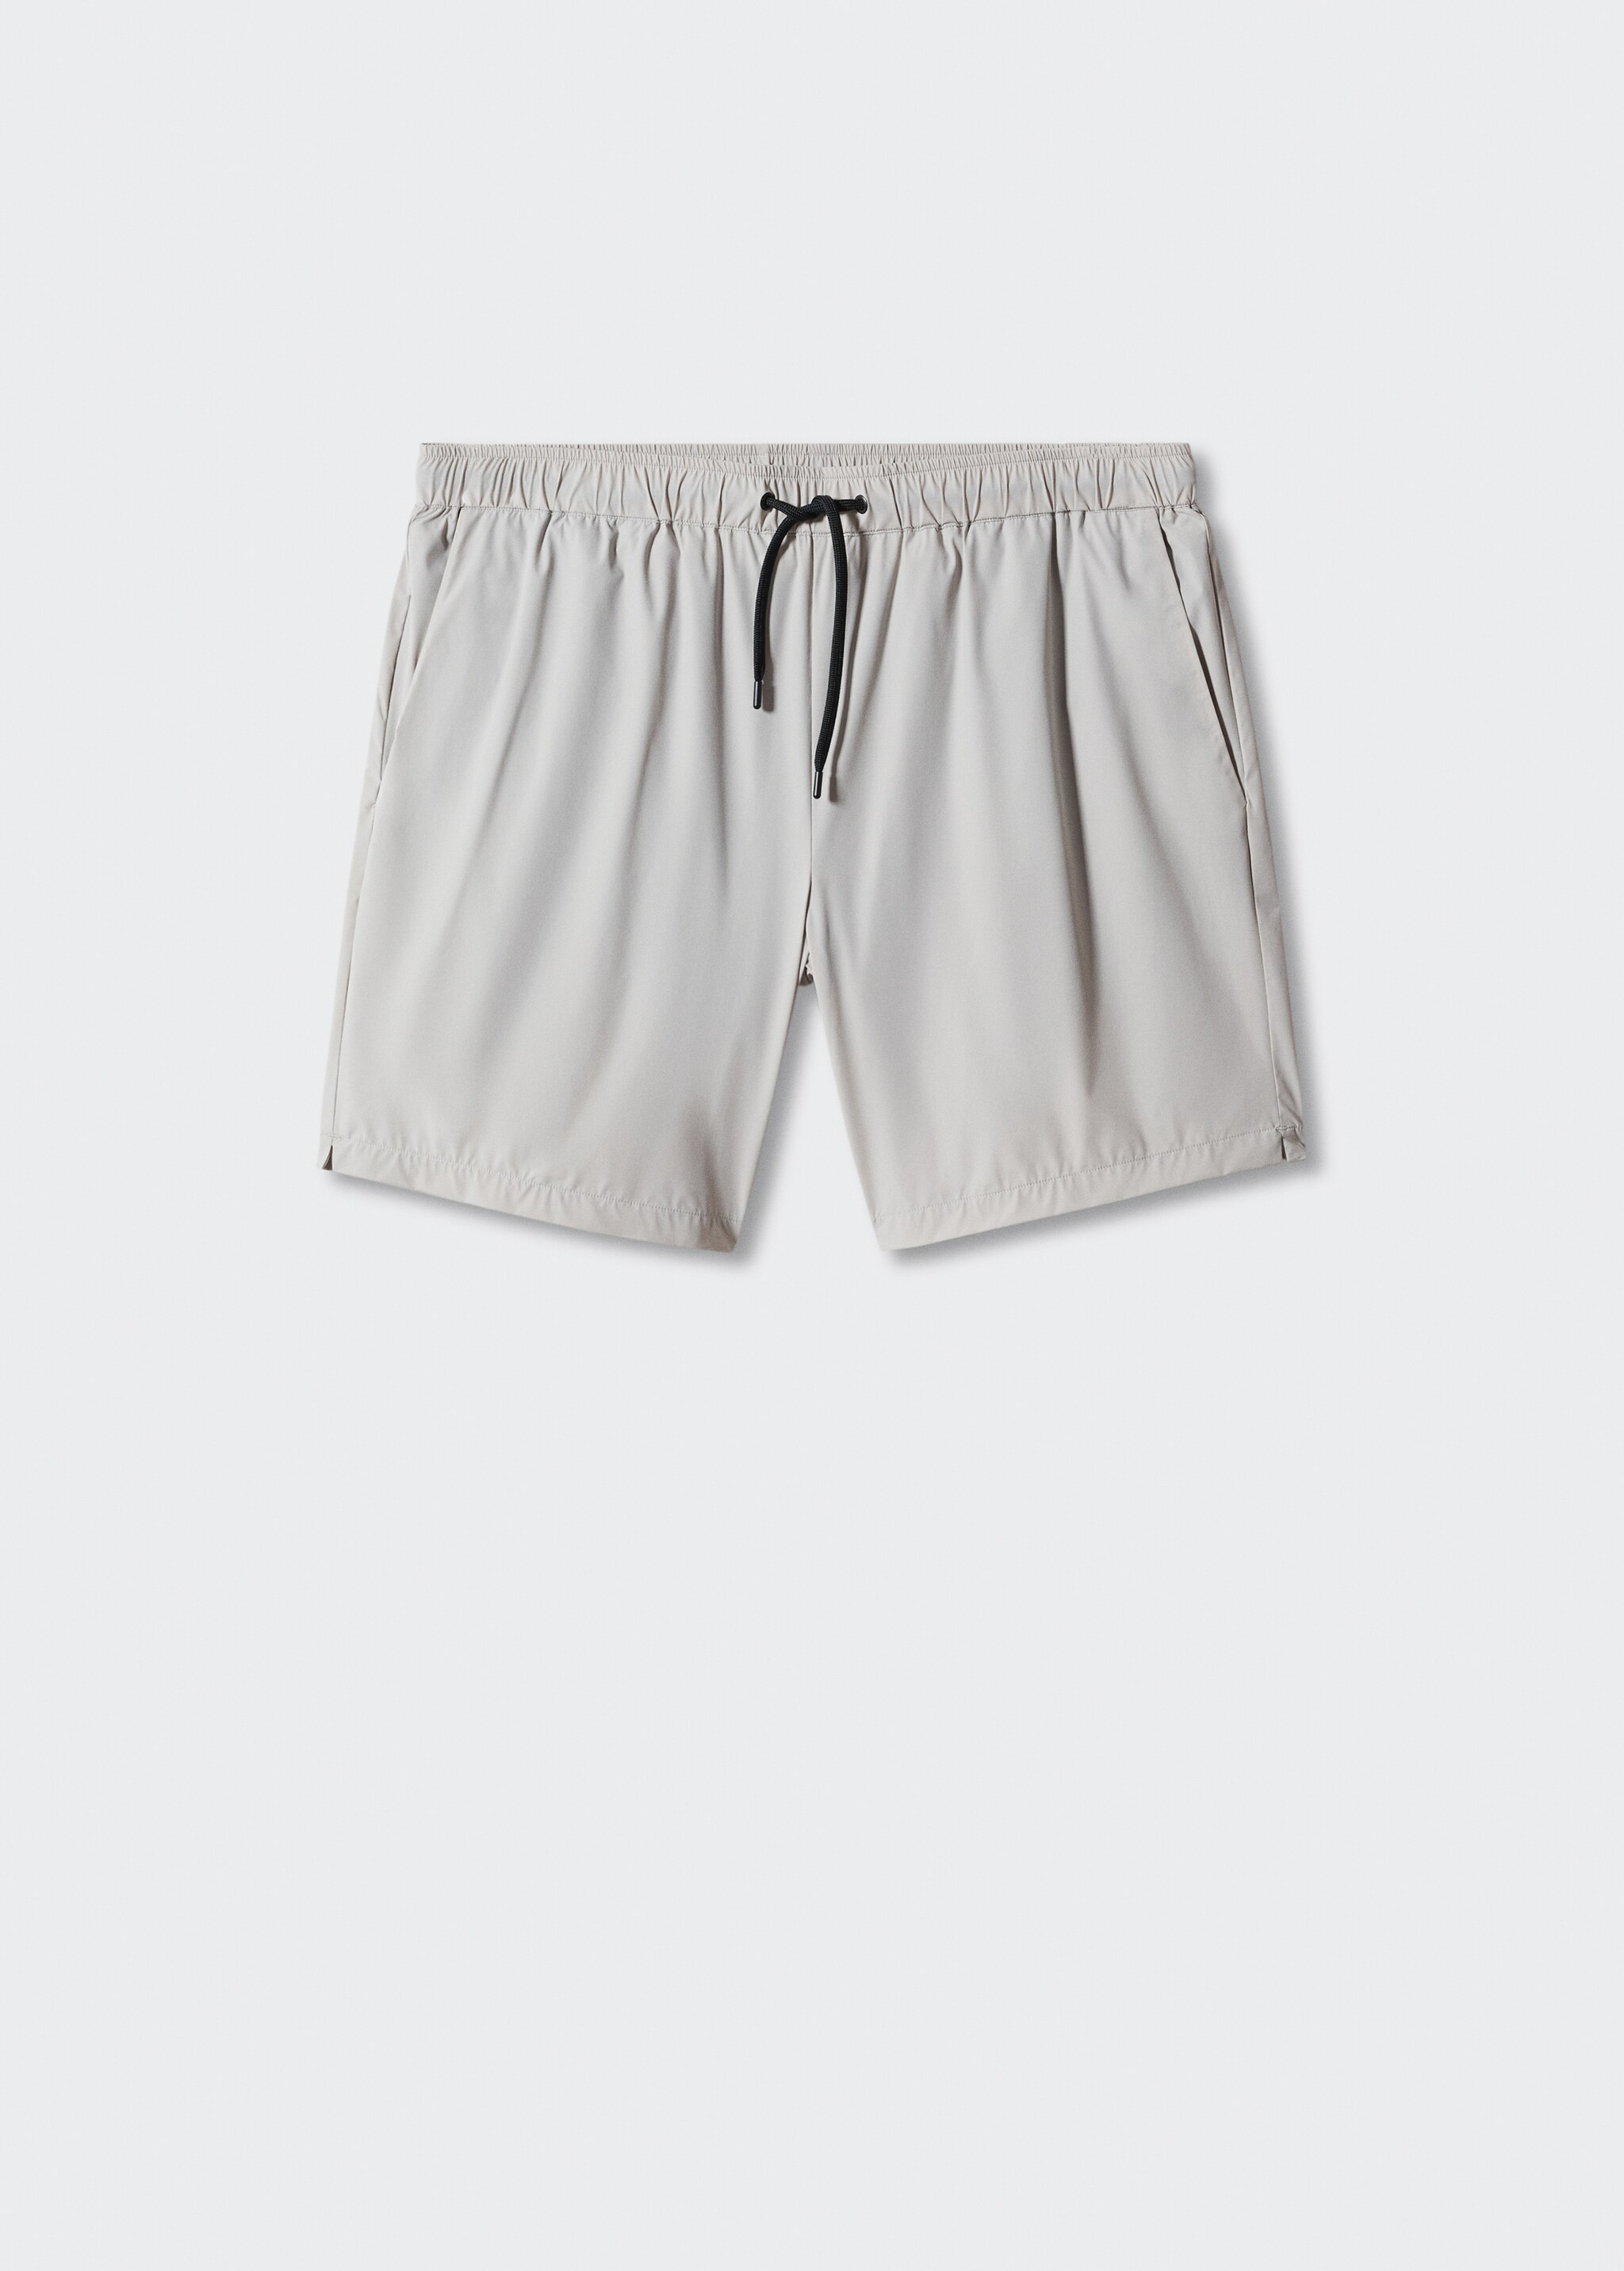 Cord plain swimming trunks - Article without model